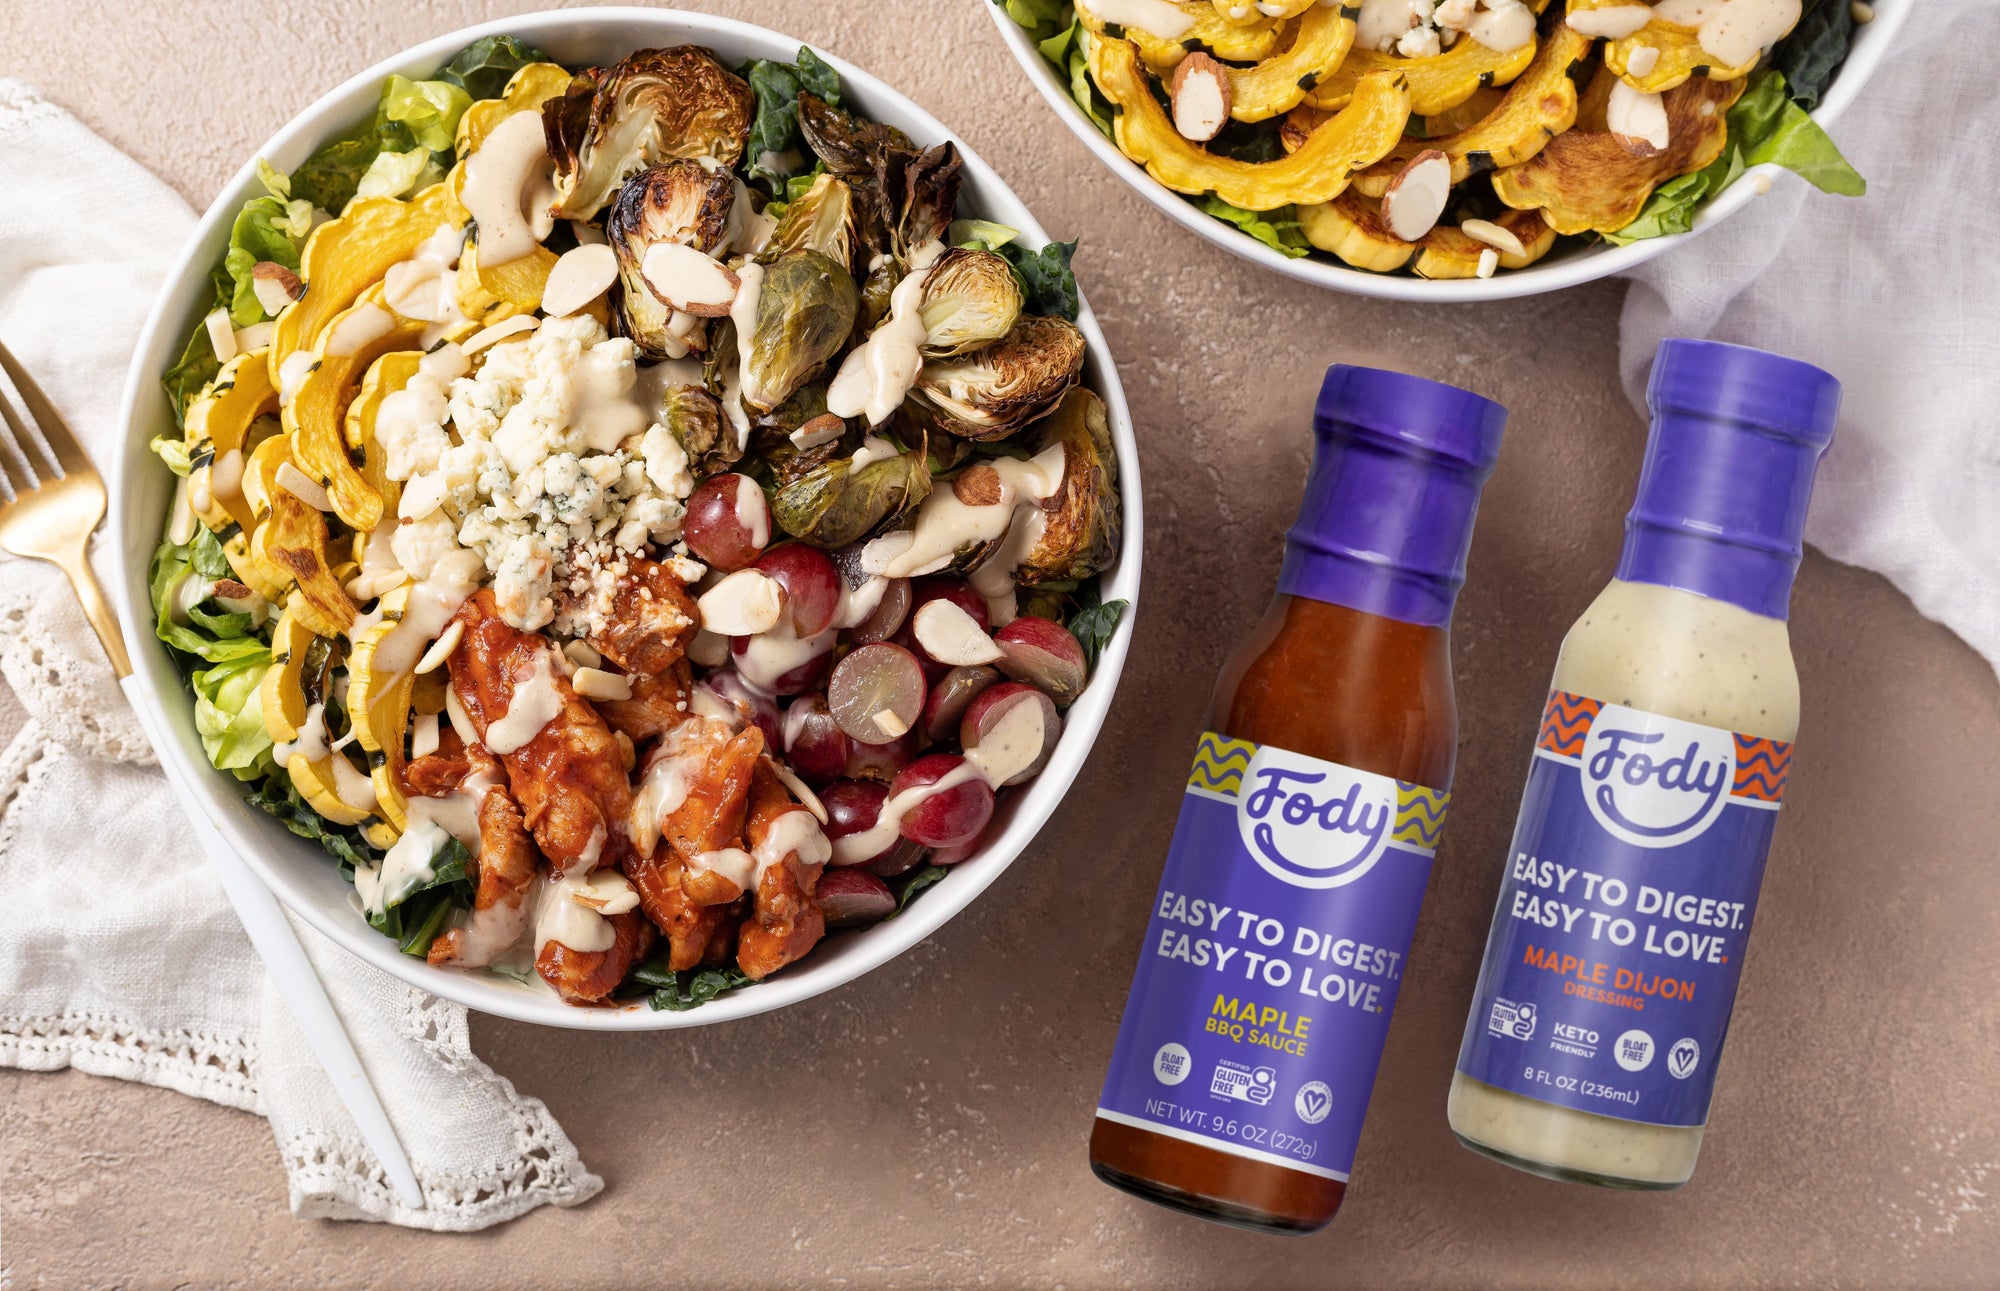 An image of Fody's Maple BBQ chicken and roasted veggie salad. Two large round bowls filled with the aforementioned ingredients sit on a wooden table beside lacy napkins and two bottles of Fody's salad dressing.